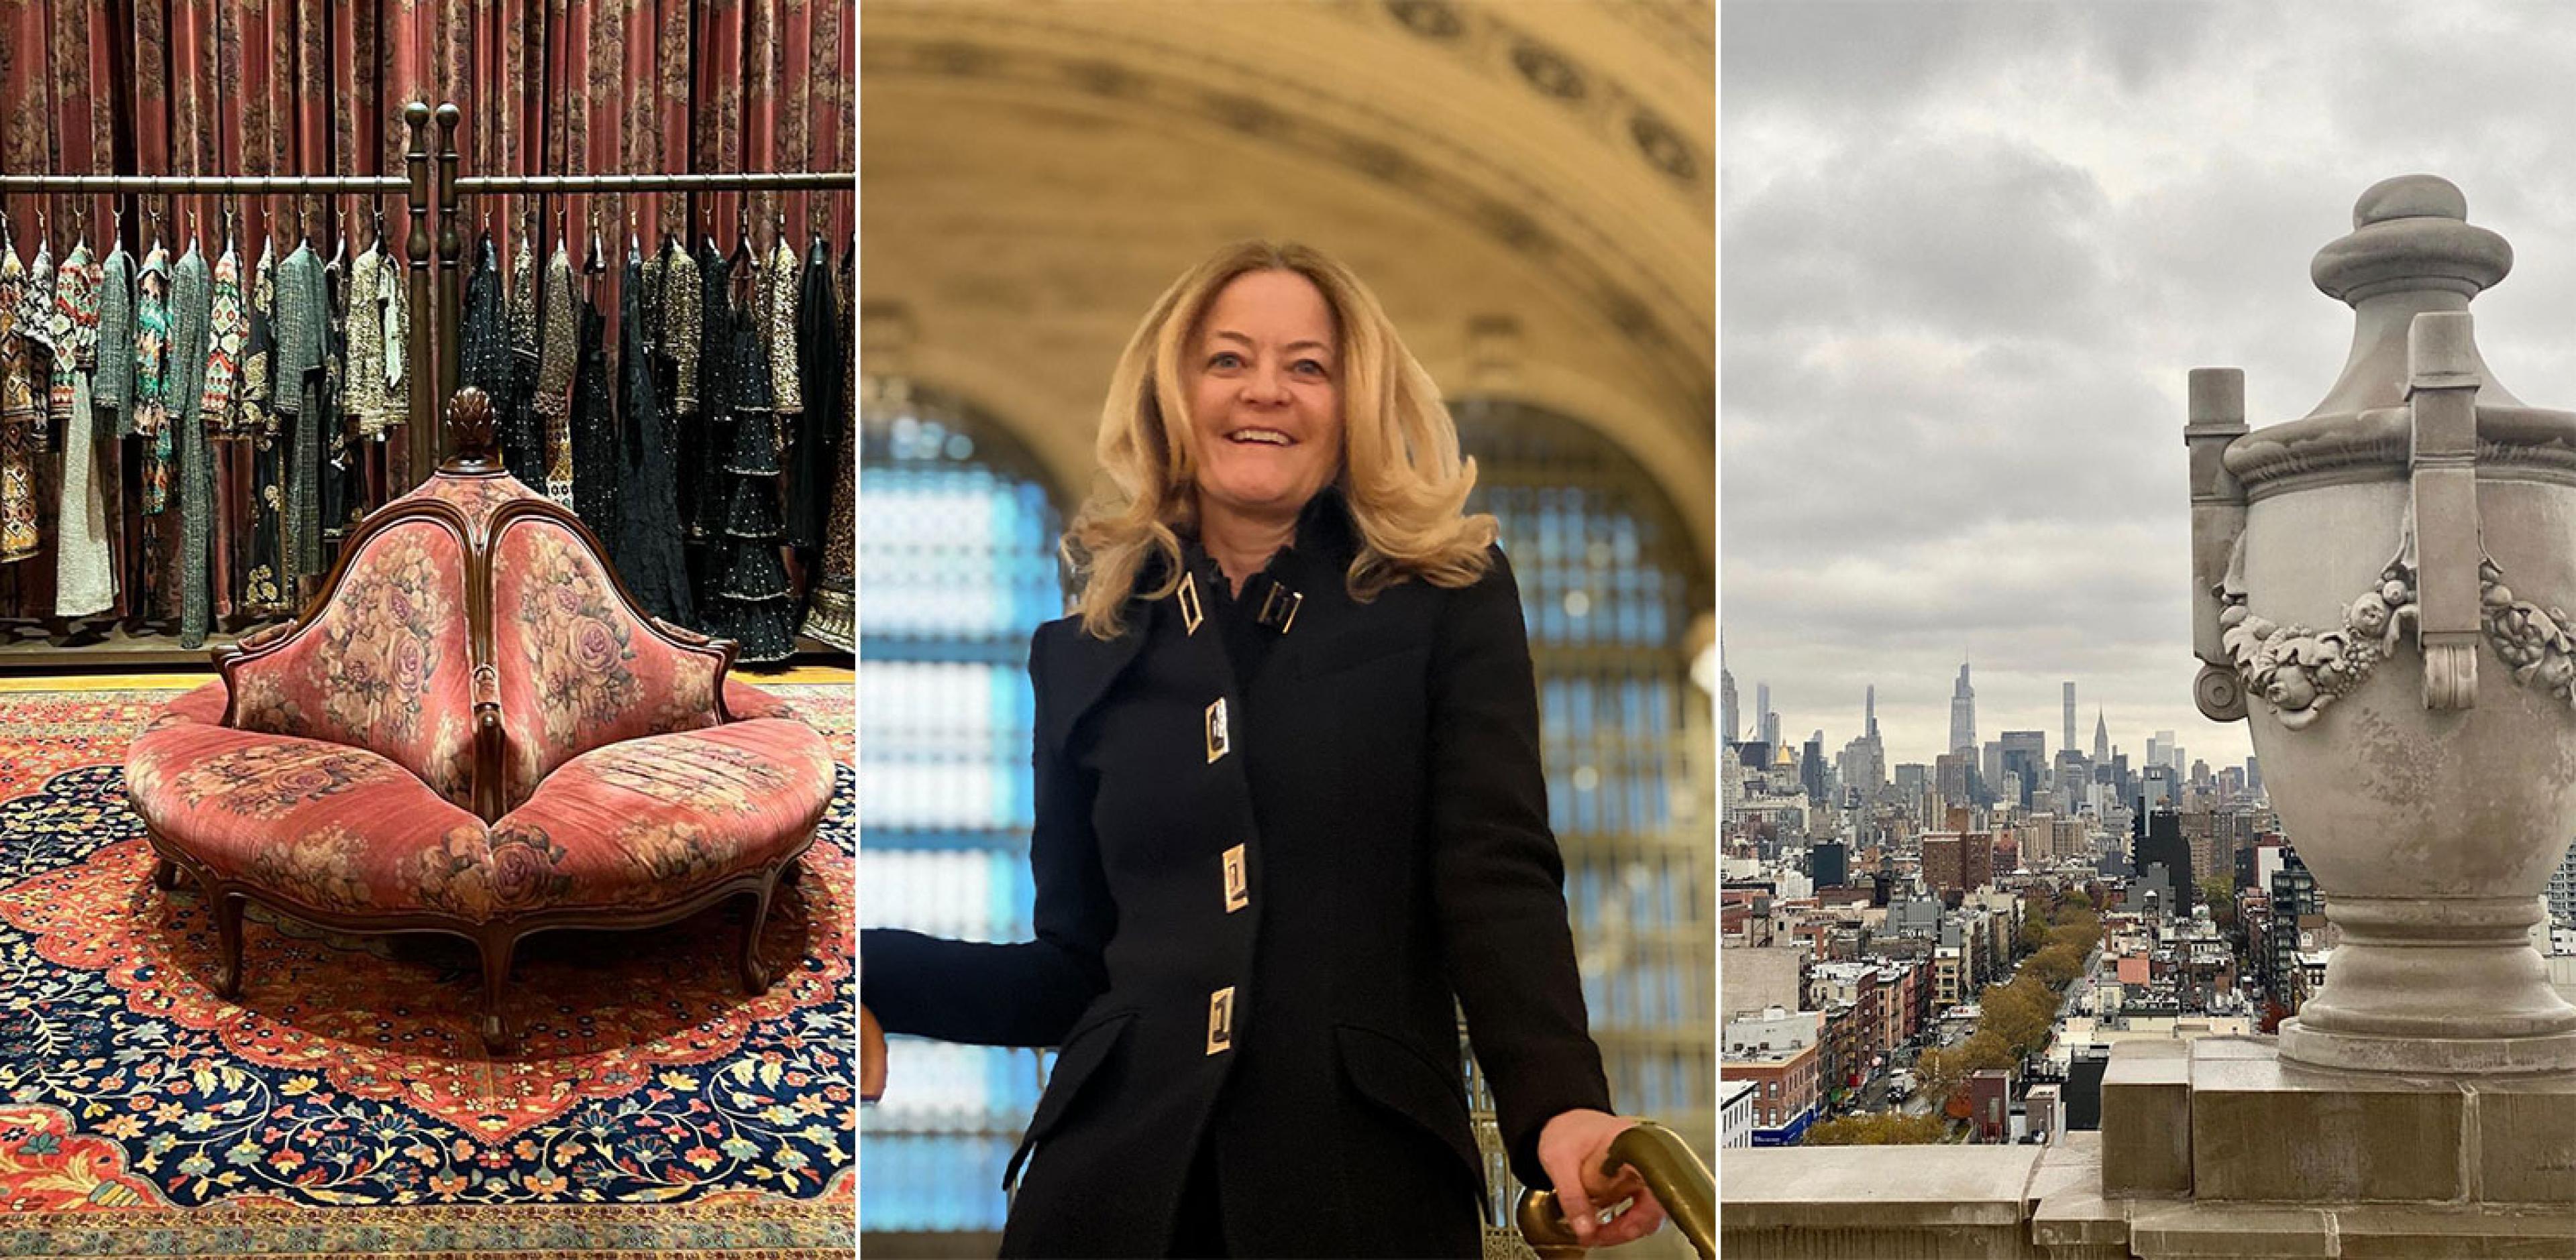 three photos. From left: a luxurious clothing boutique with oriental carpet and seating in front of clothes; woman looking at camera inside a train station; sculpture on balcony overlooking nyc skyline on gray day